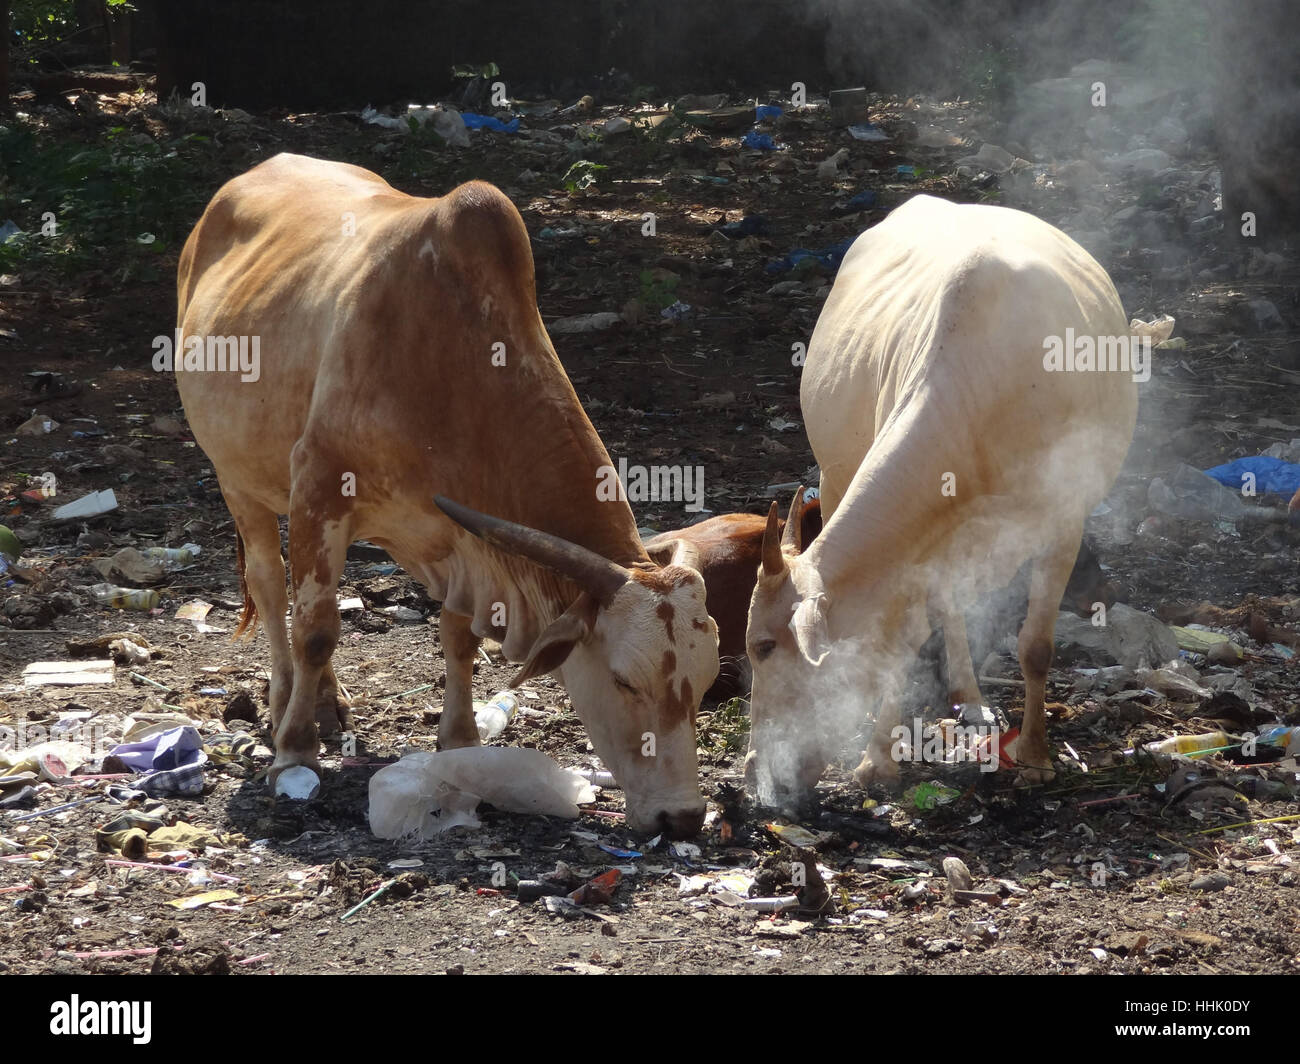 some cows on a garbage dunp in India Stock Photo